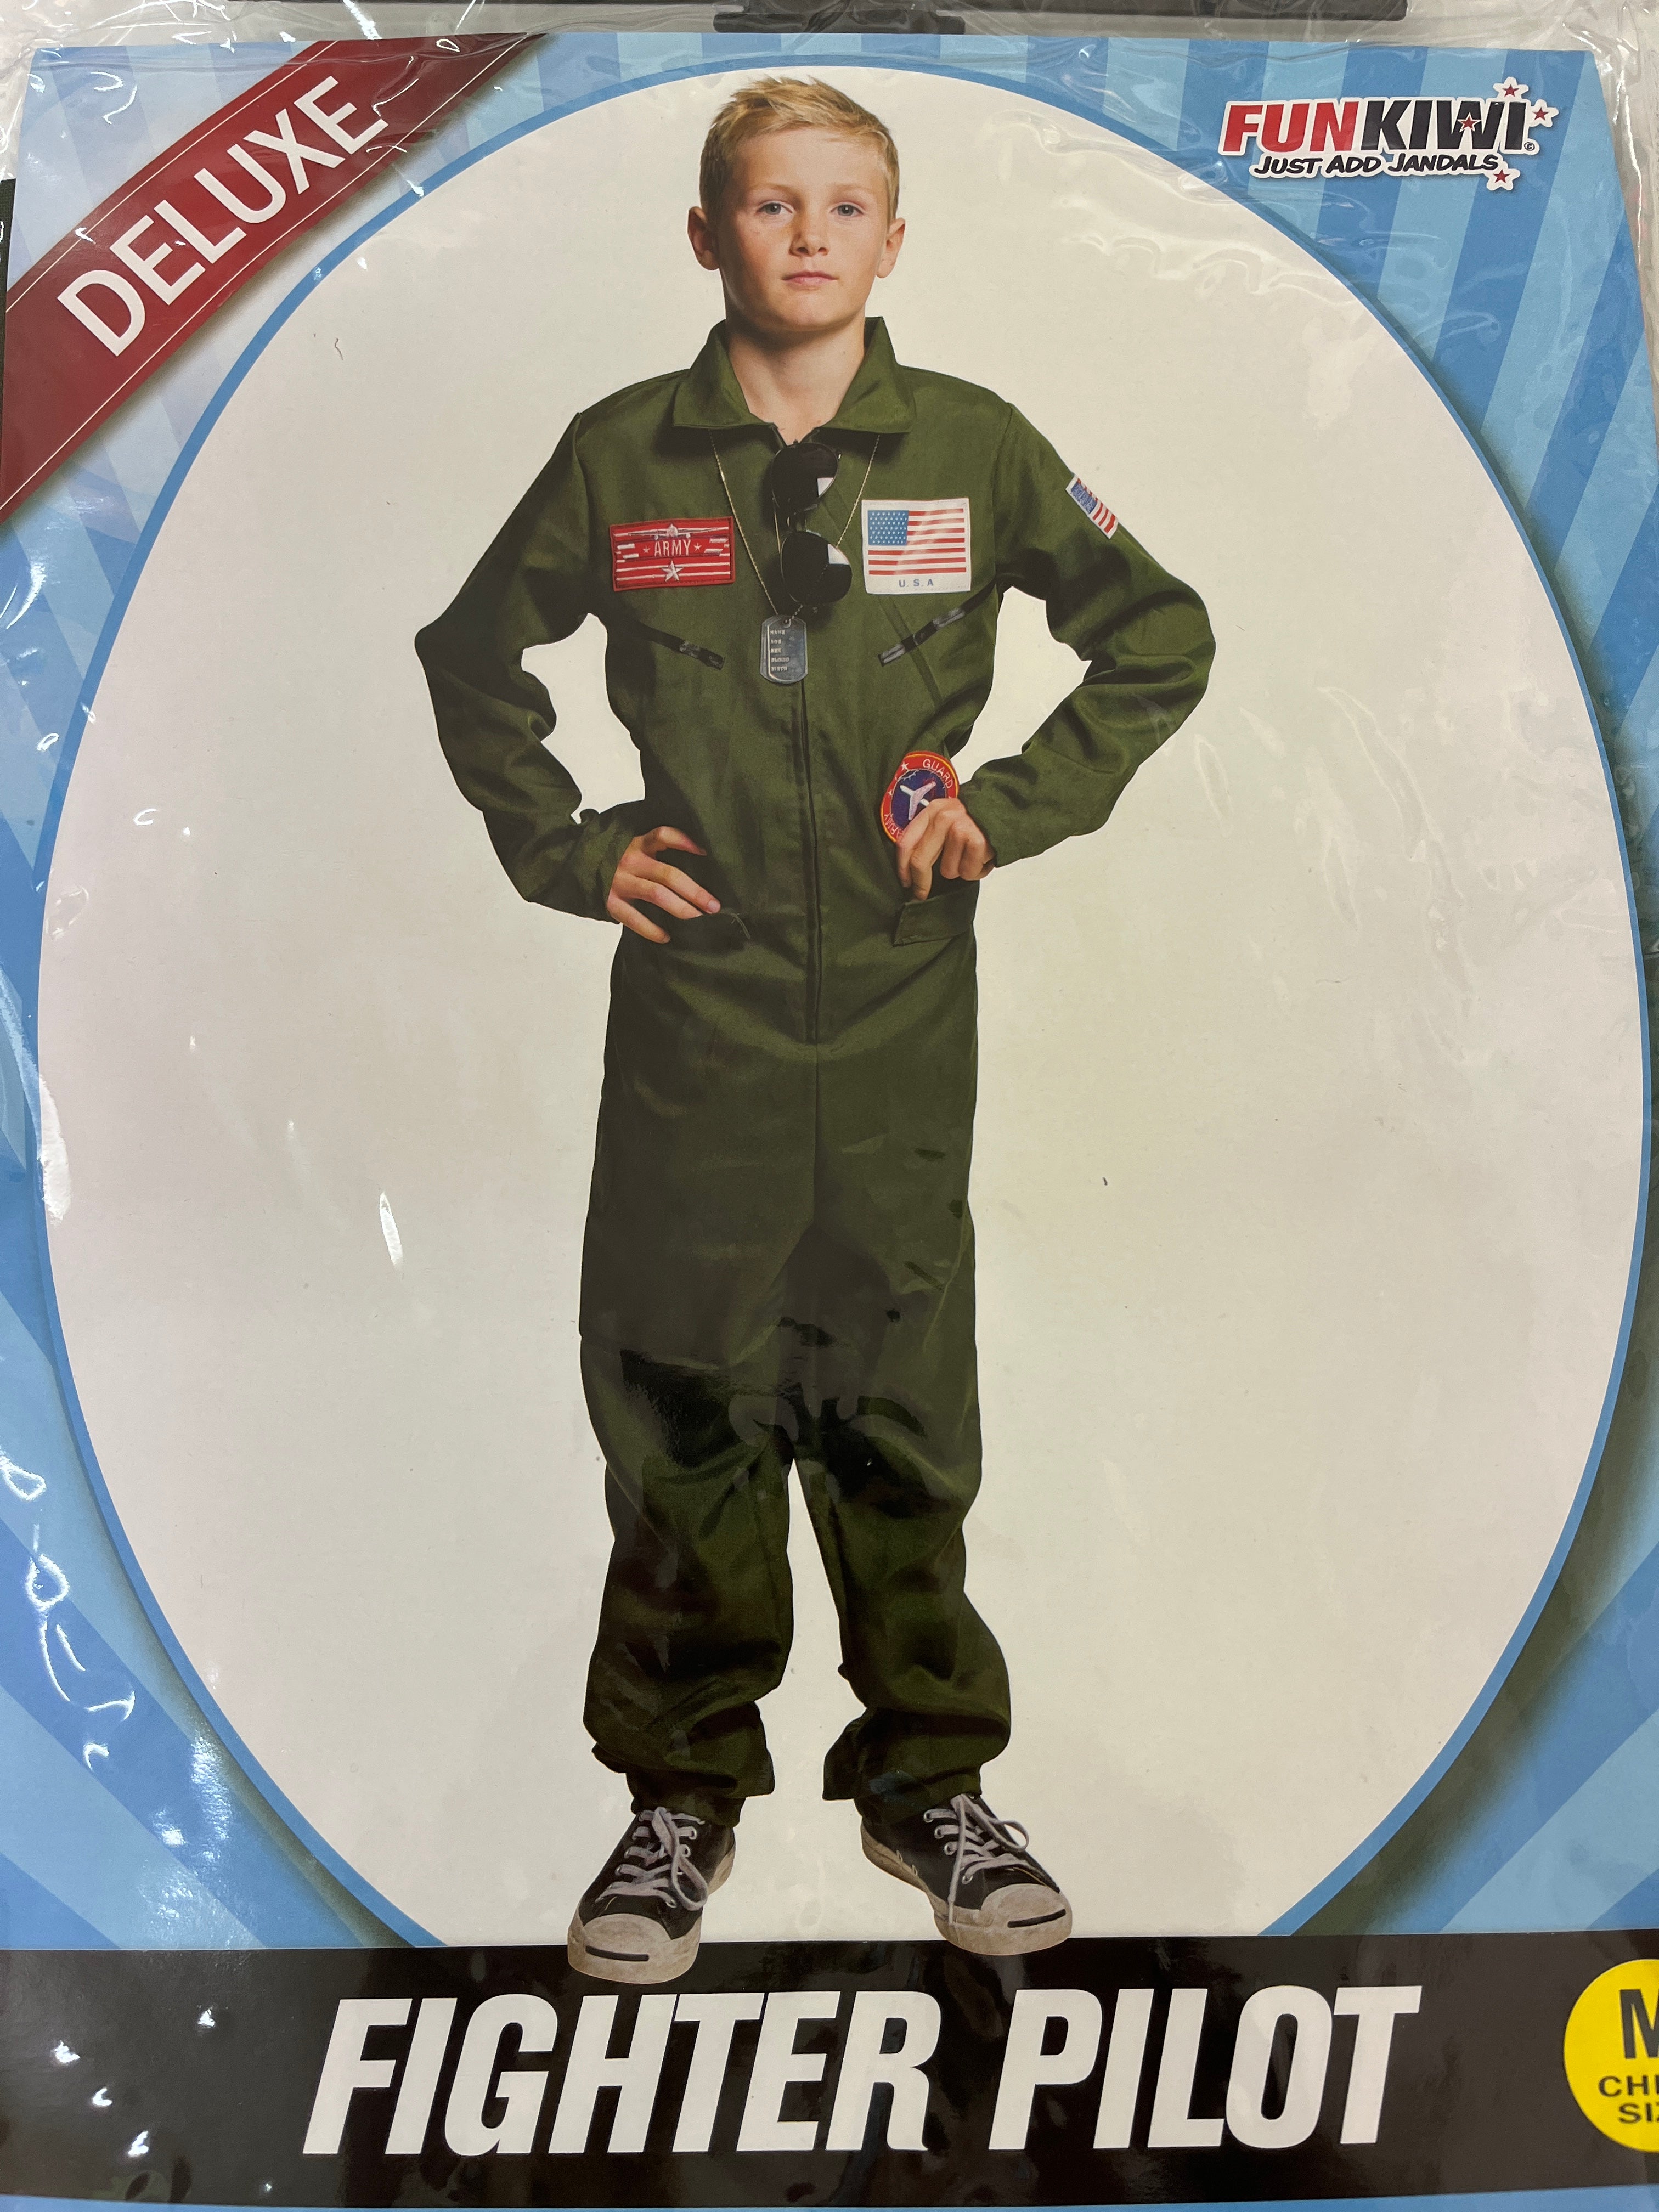 Child pilot overall,kids overall - the Aviation Store.net